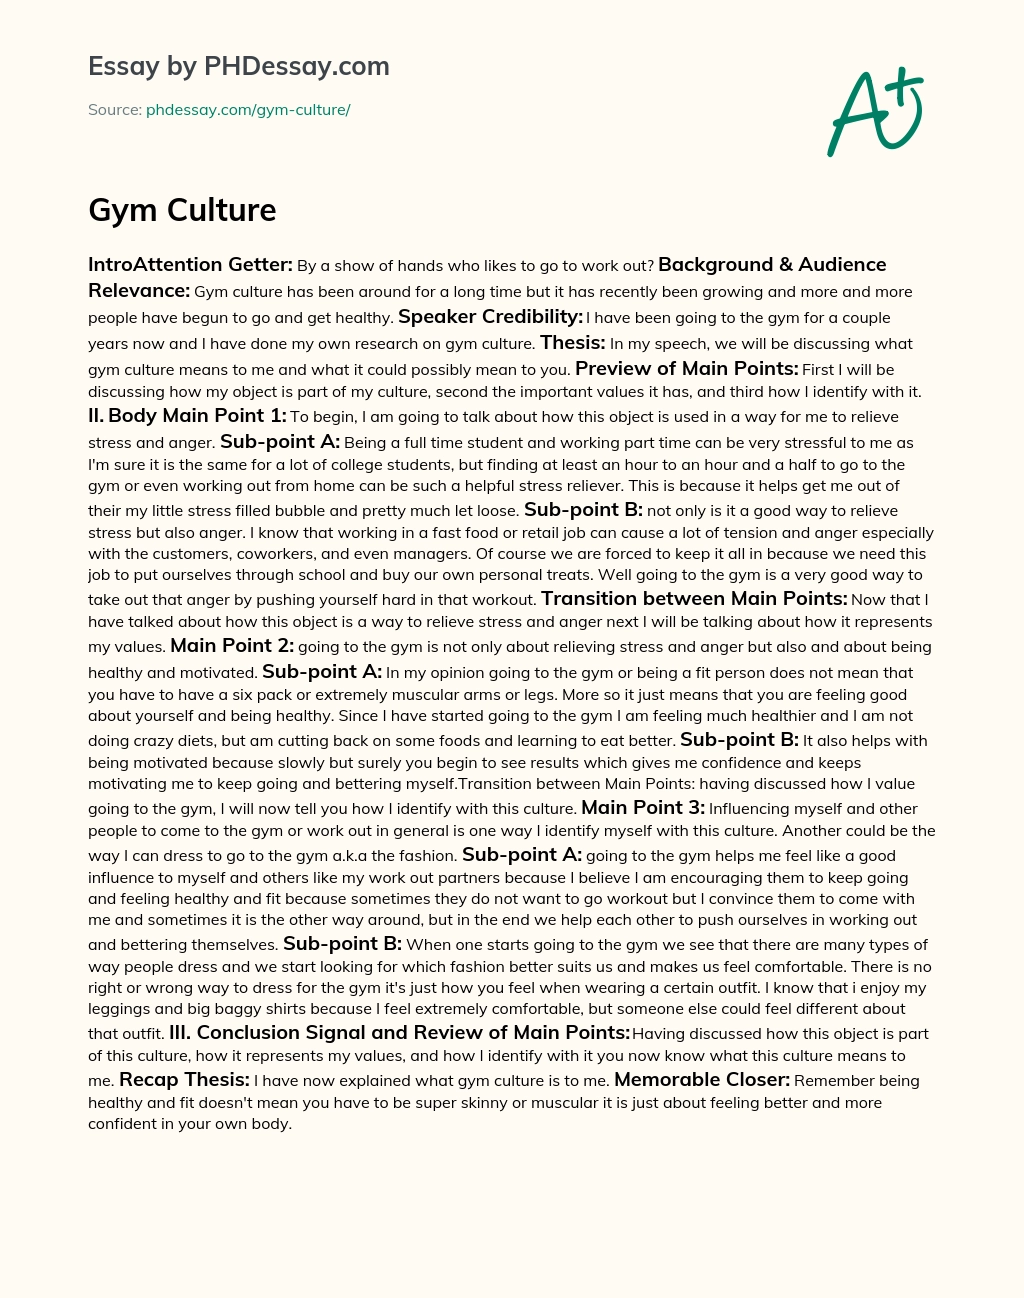 The Growing Popularity of Gym Culture and Its Benefits essay